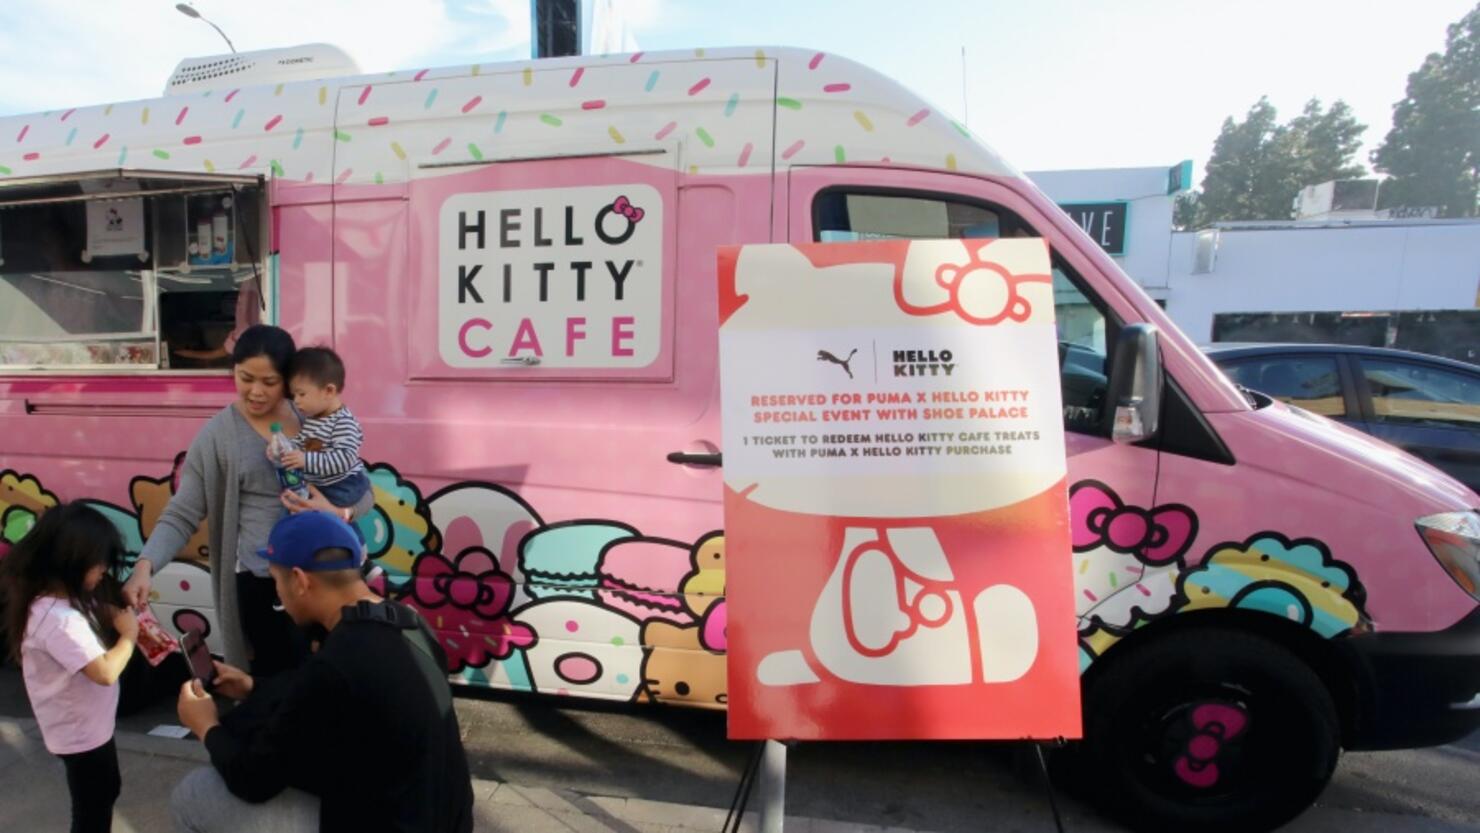 Hello Kitty Cafe Truck - 🎀Sweet news!🎀 Stay cute in our new Hello Kitty  Cafe exclusive Patch Hoodie and T-Shirt! These and our new Cookie Plush are  now available for purchase online!